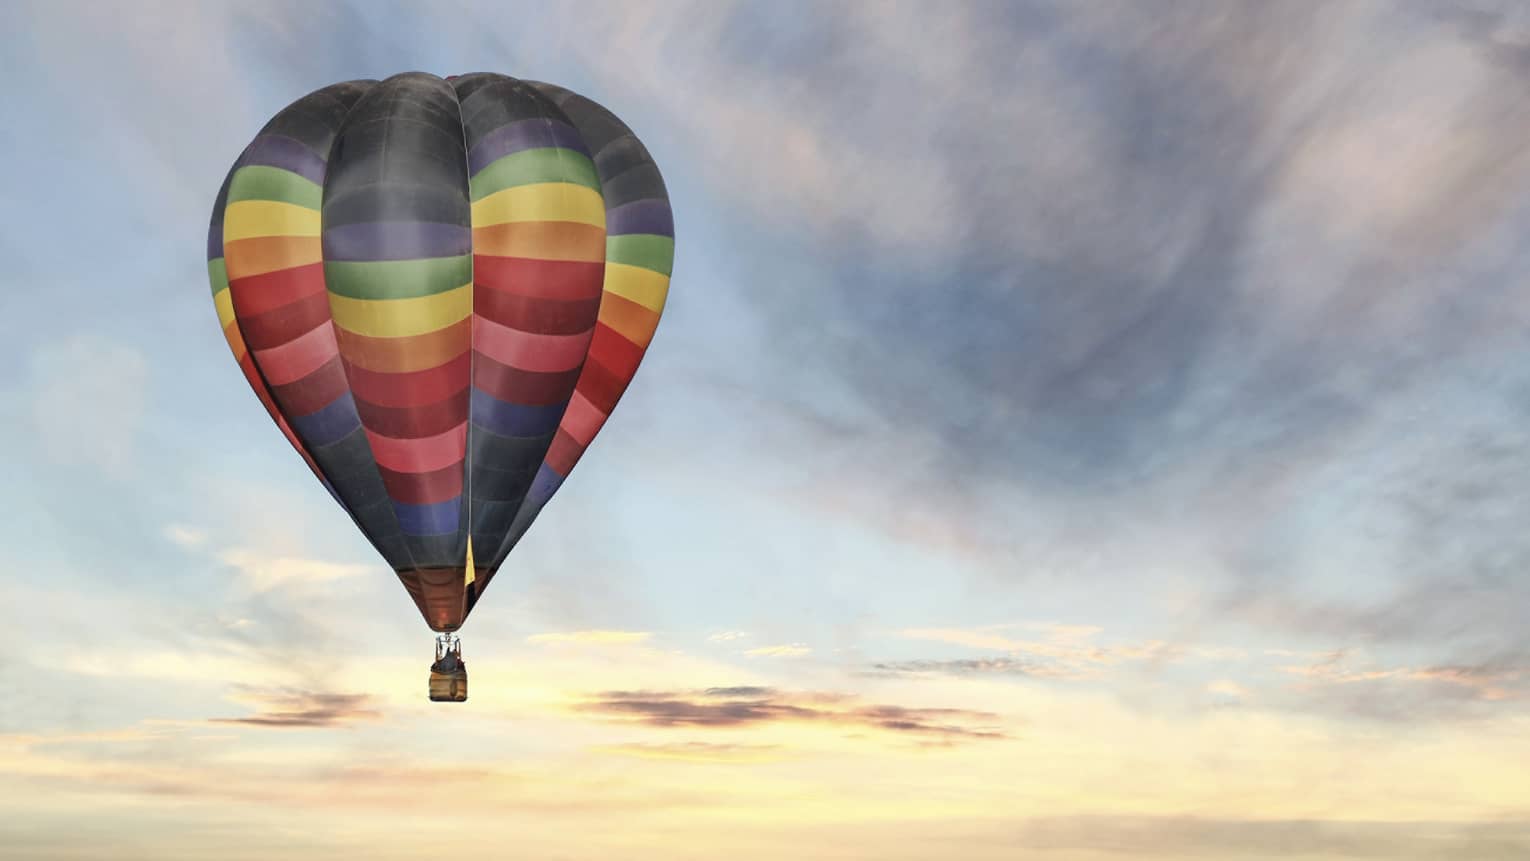 Rainbow-striped hot air balloon floats in the sky at sunset